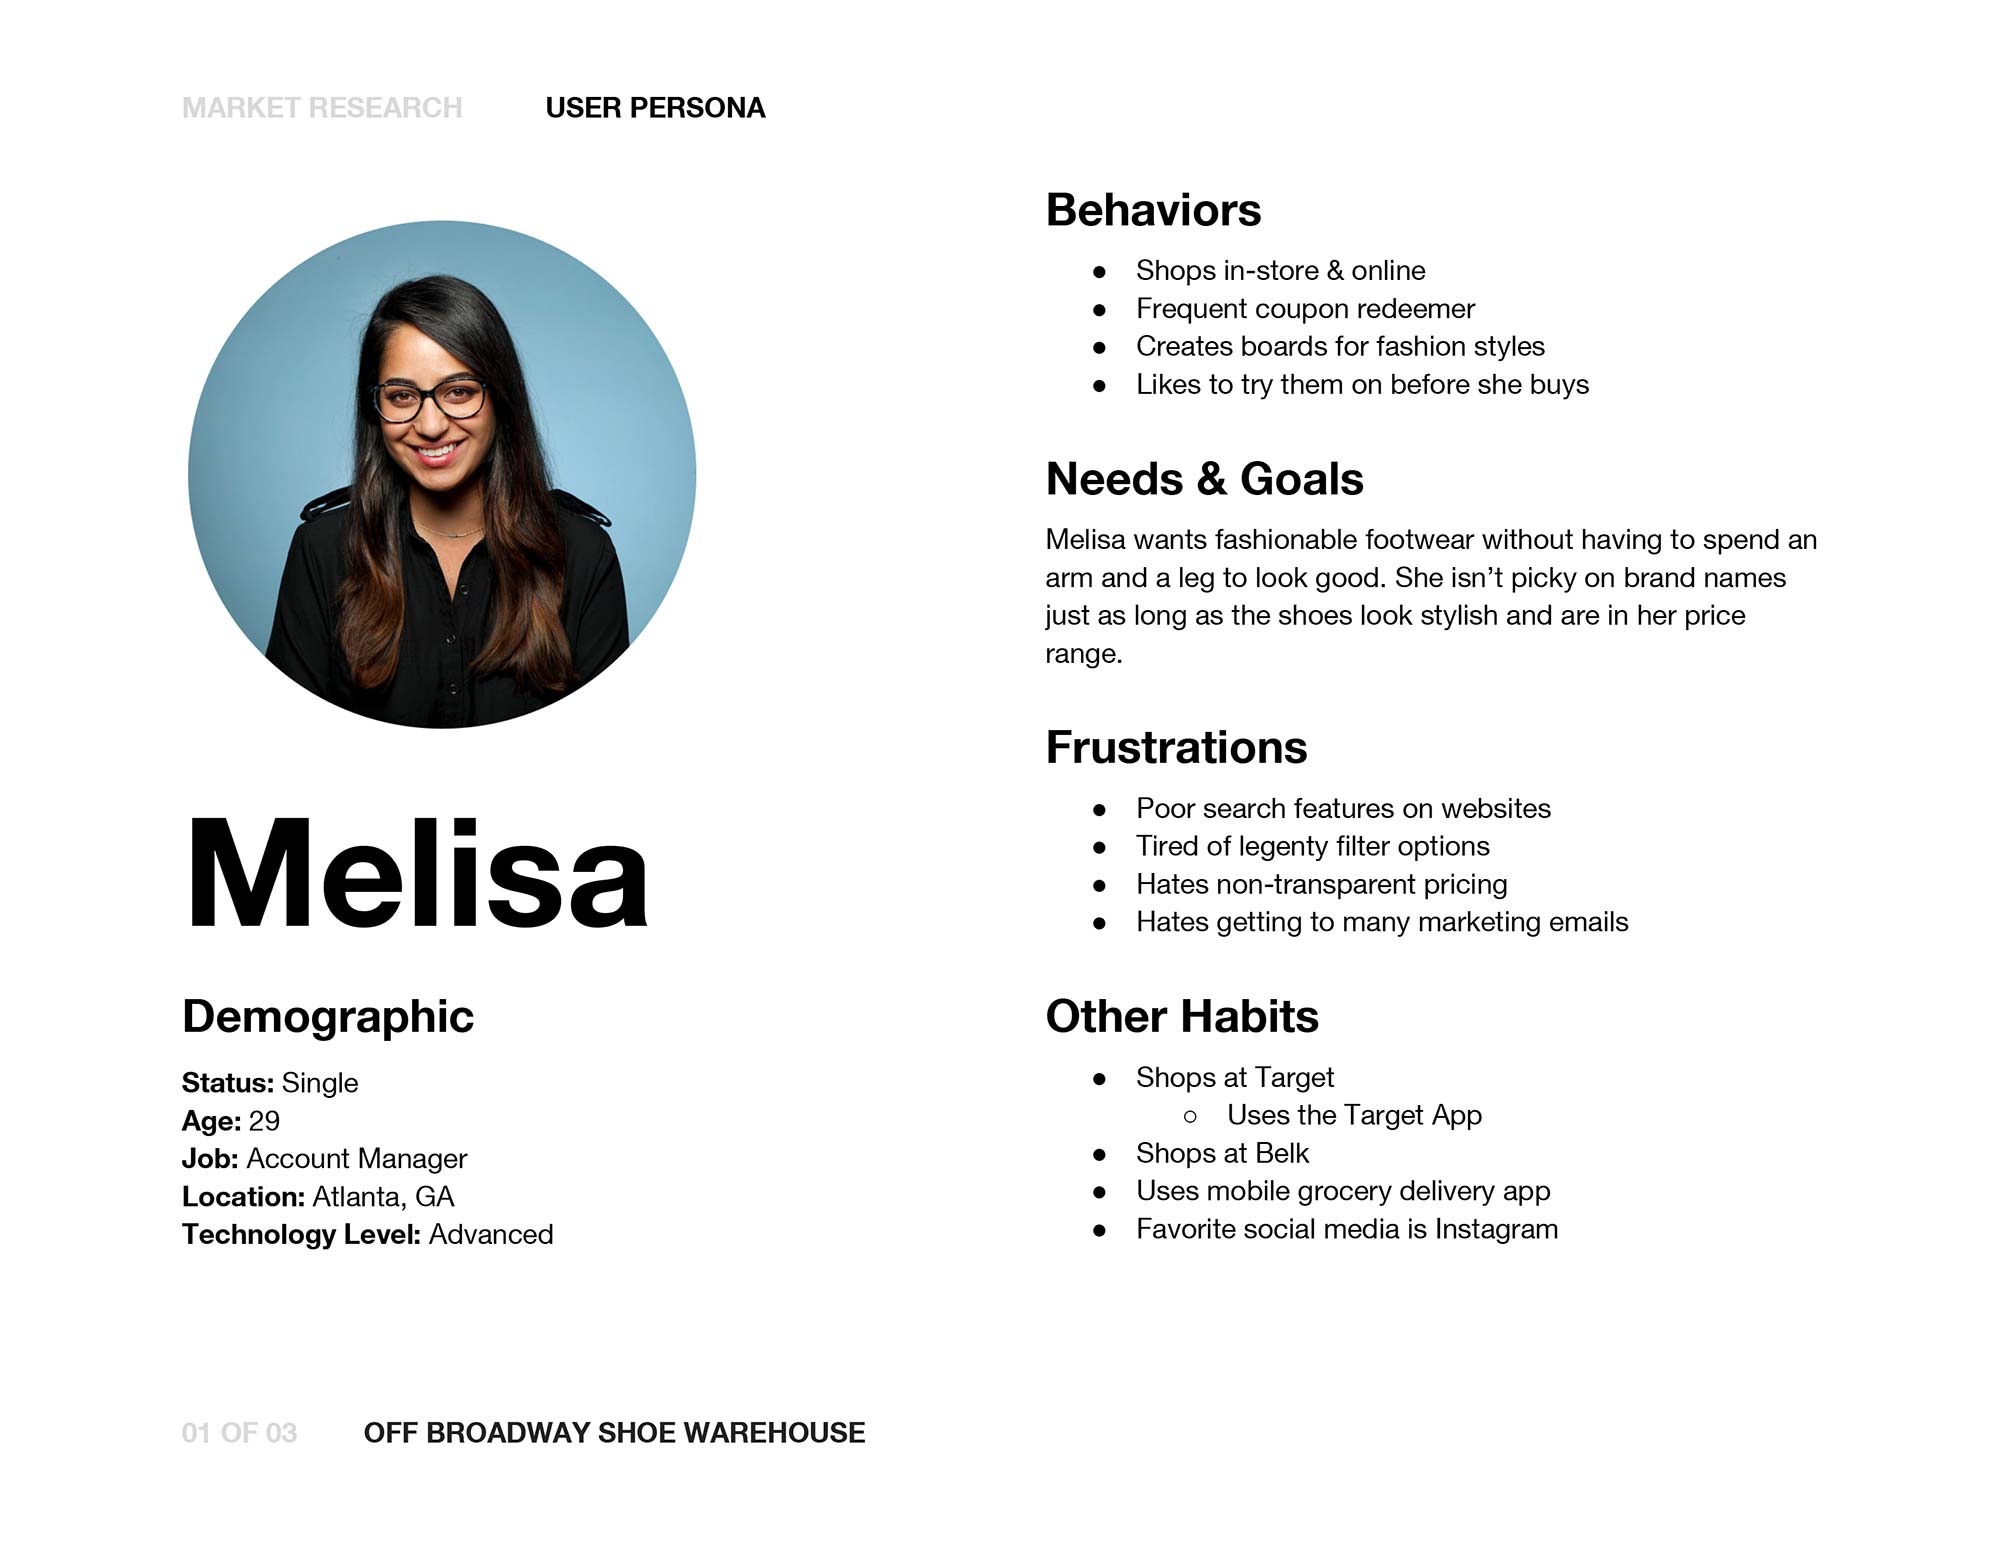 a user persona of a woman named melisa